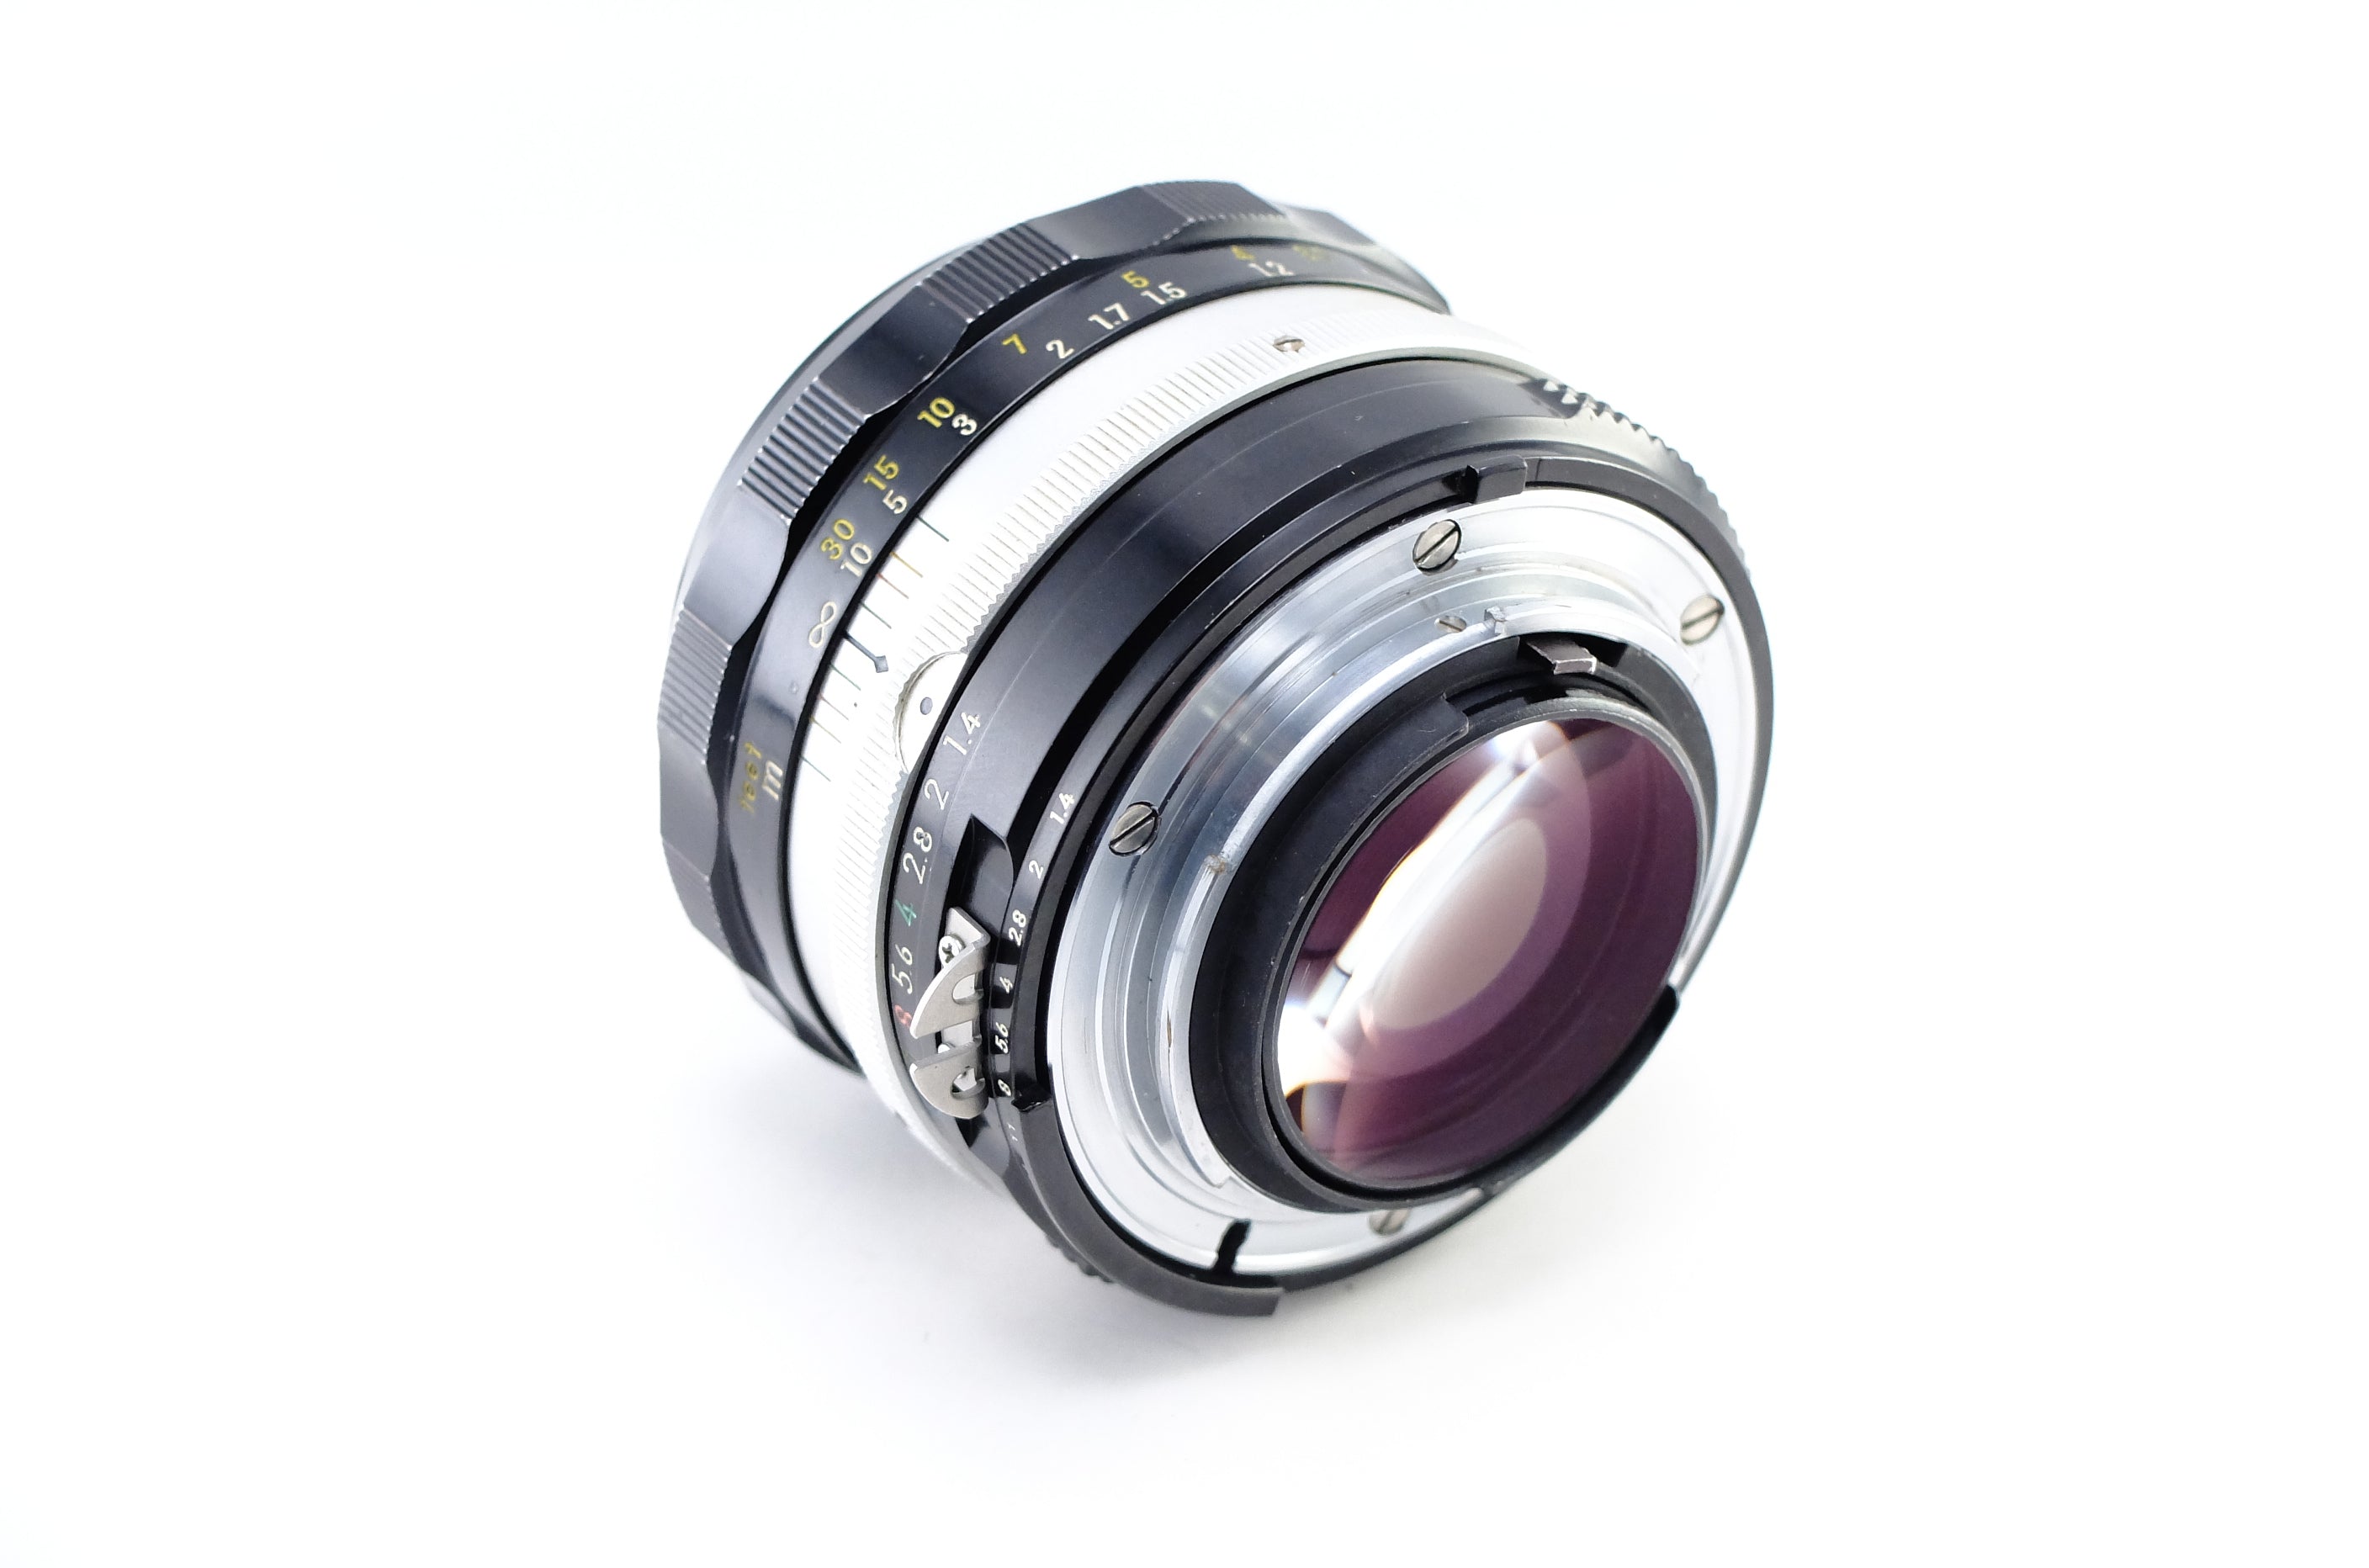 Nikon】NIKKOR-S.C Auto 50mm F1.4 Ai改 OH済み [ニコンFマウント 